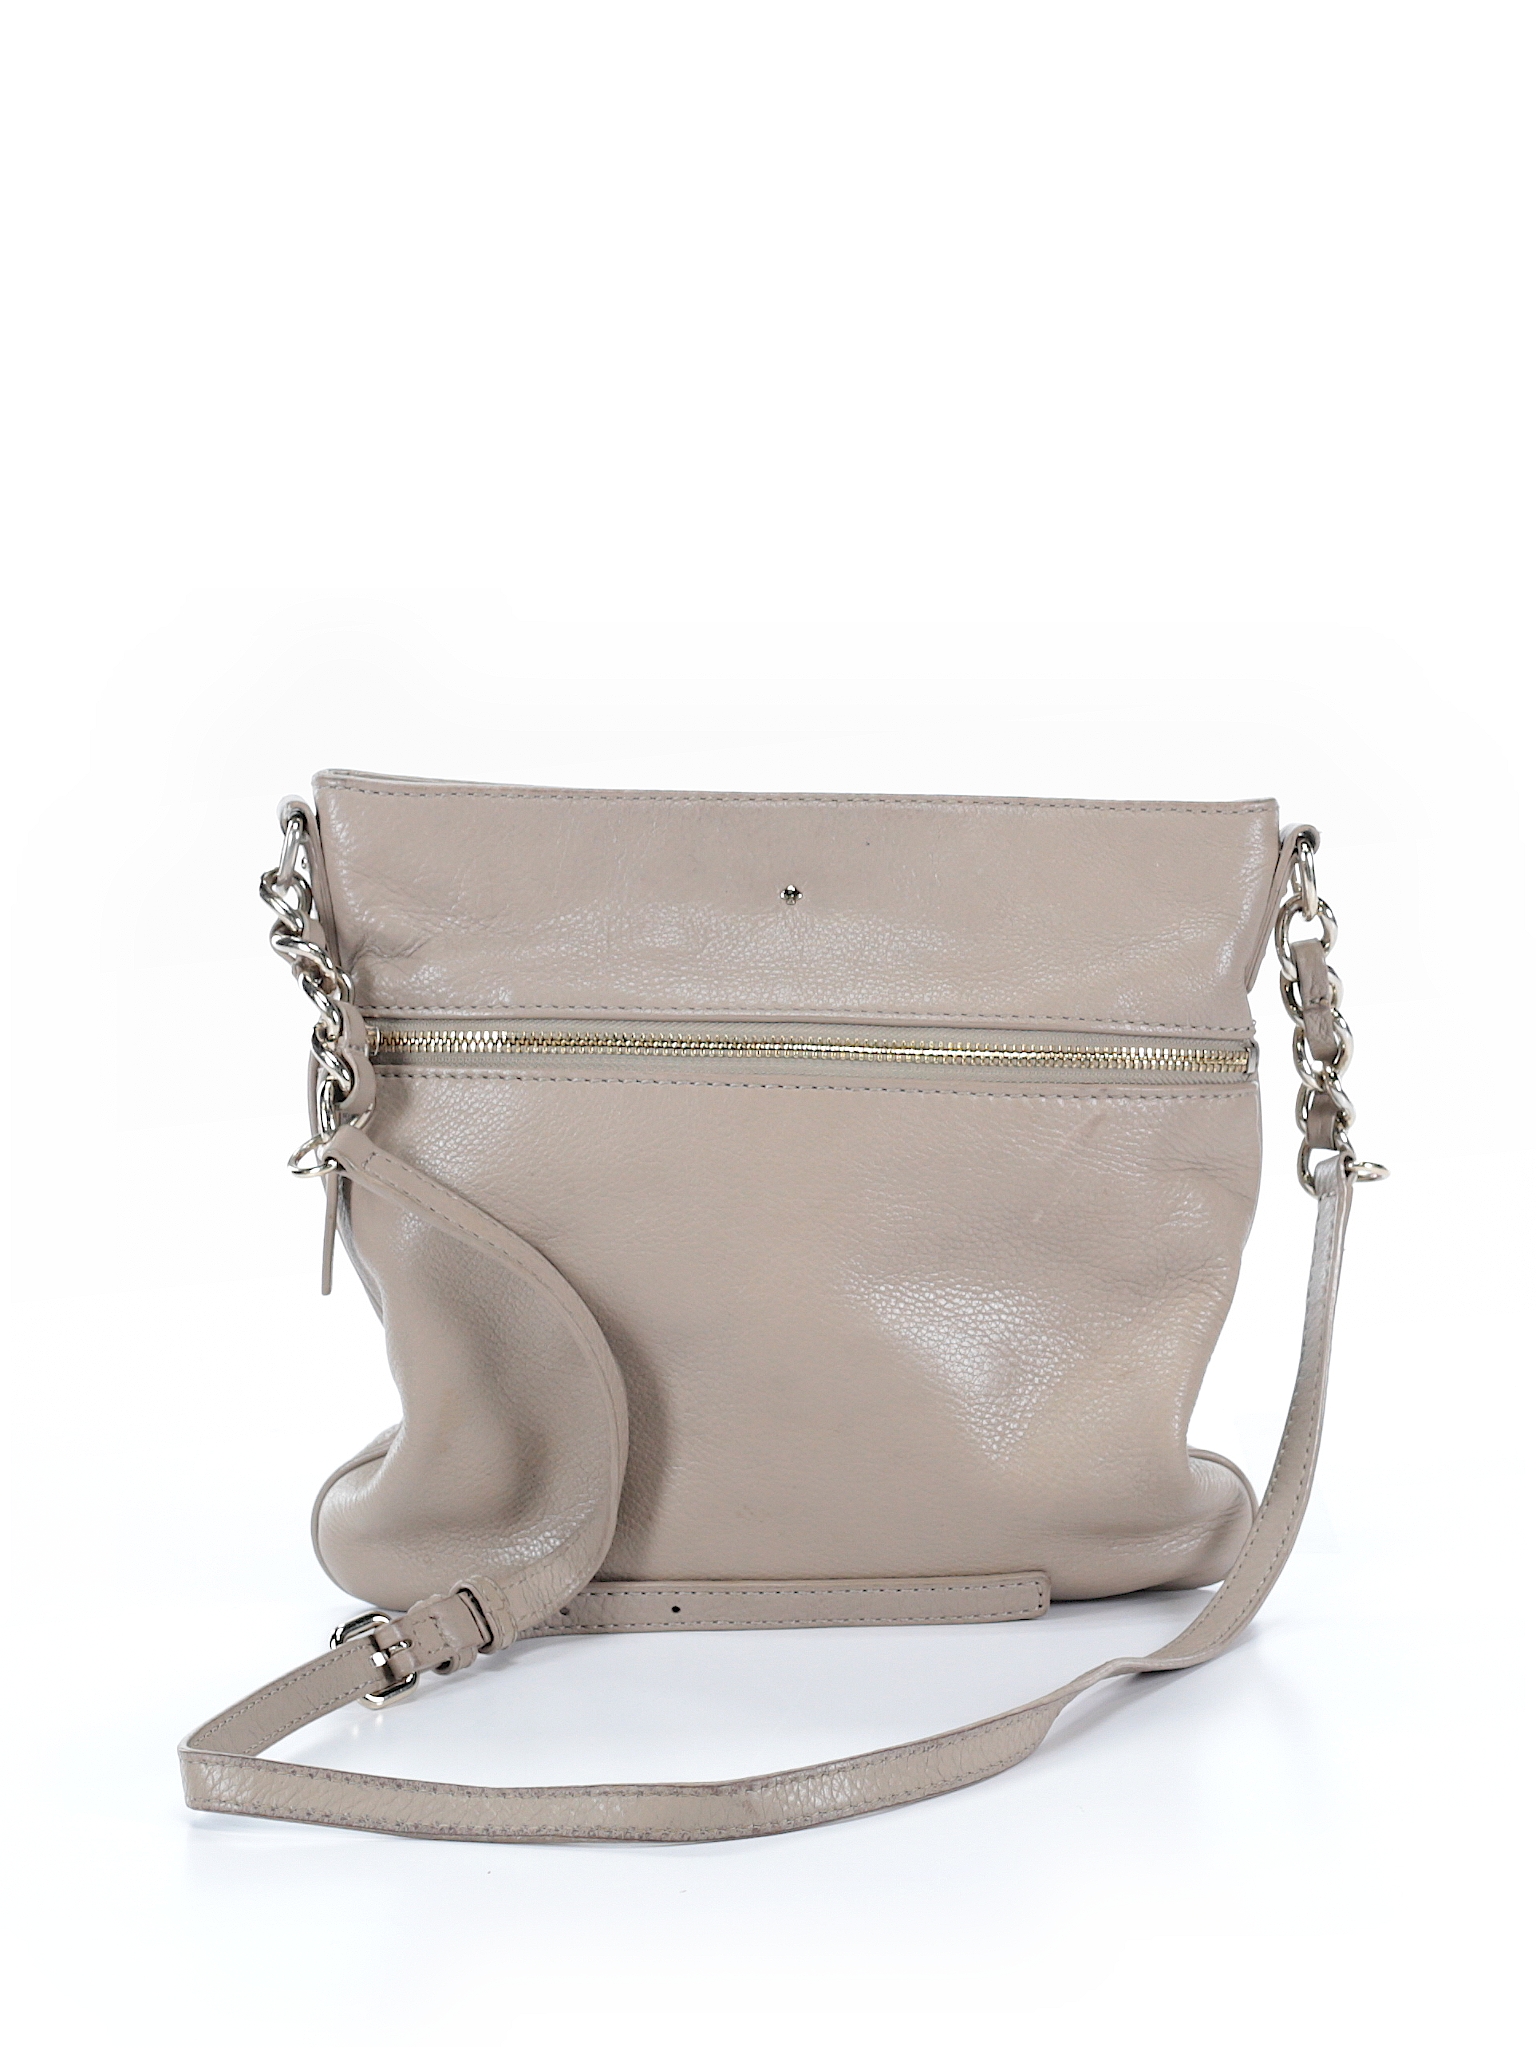 Unbranded Solid Gray Leather Crossbody Bag One Size - 73% off | thredUP